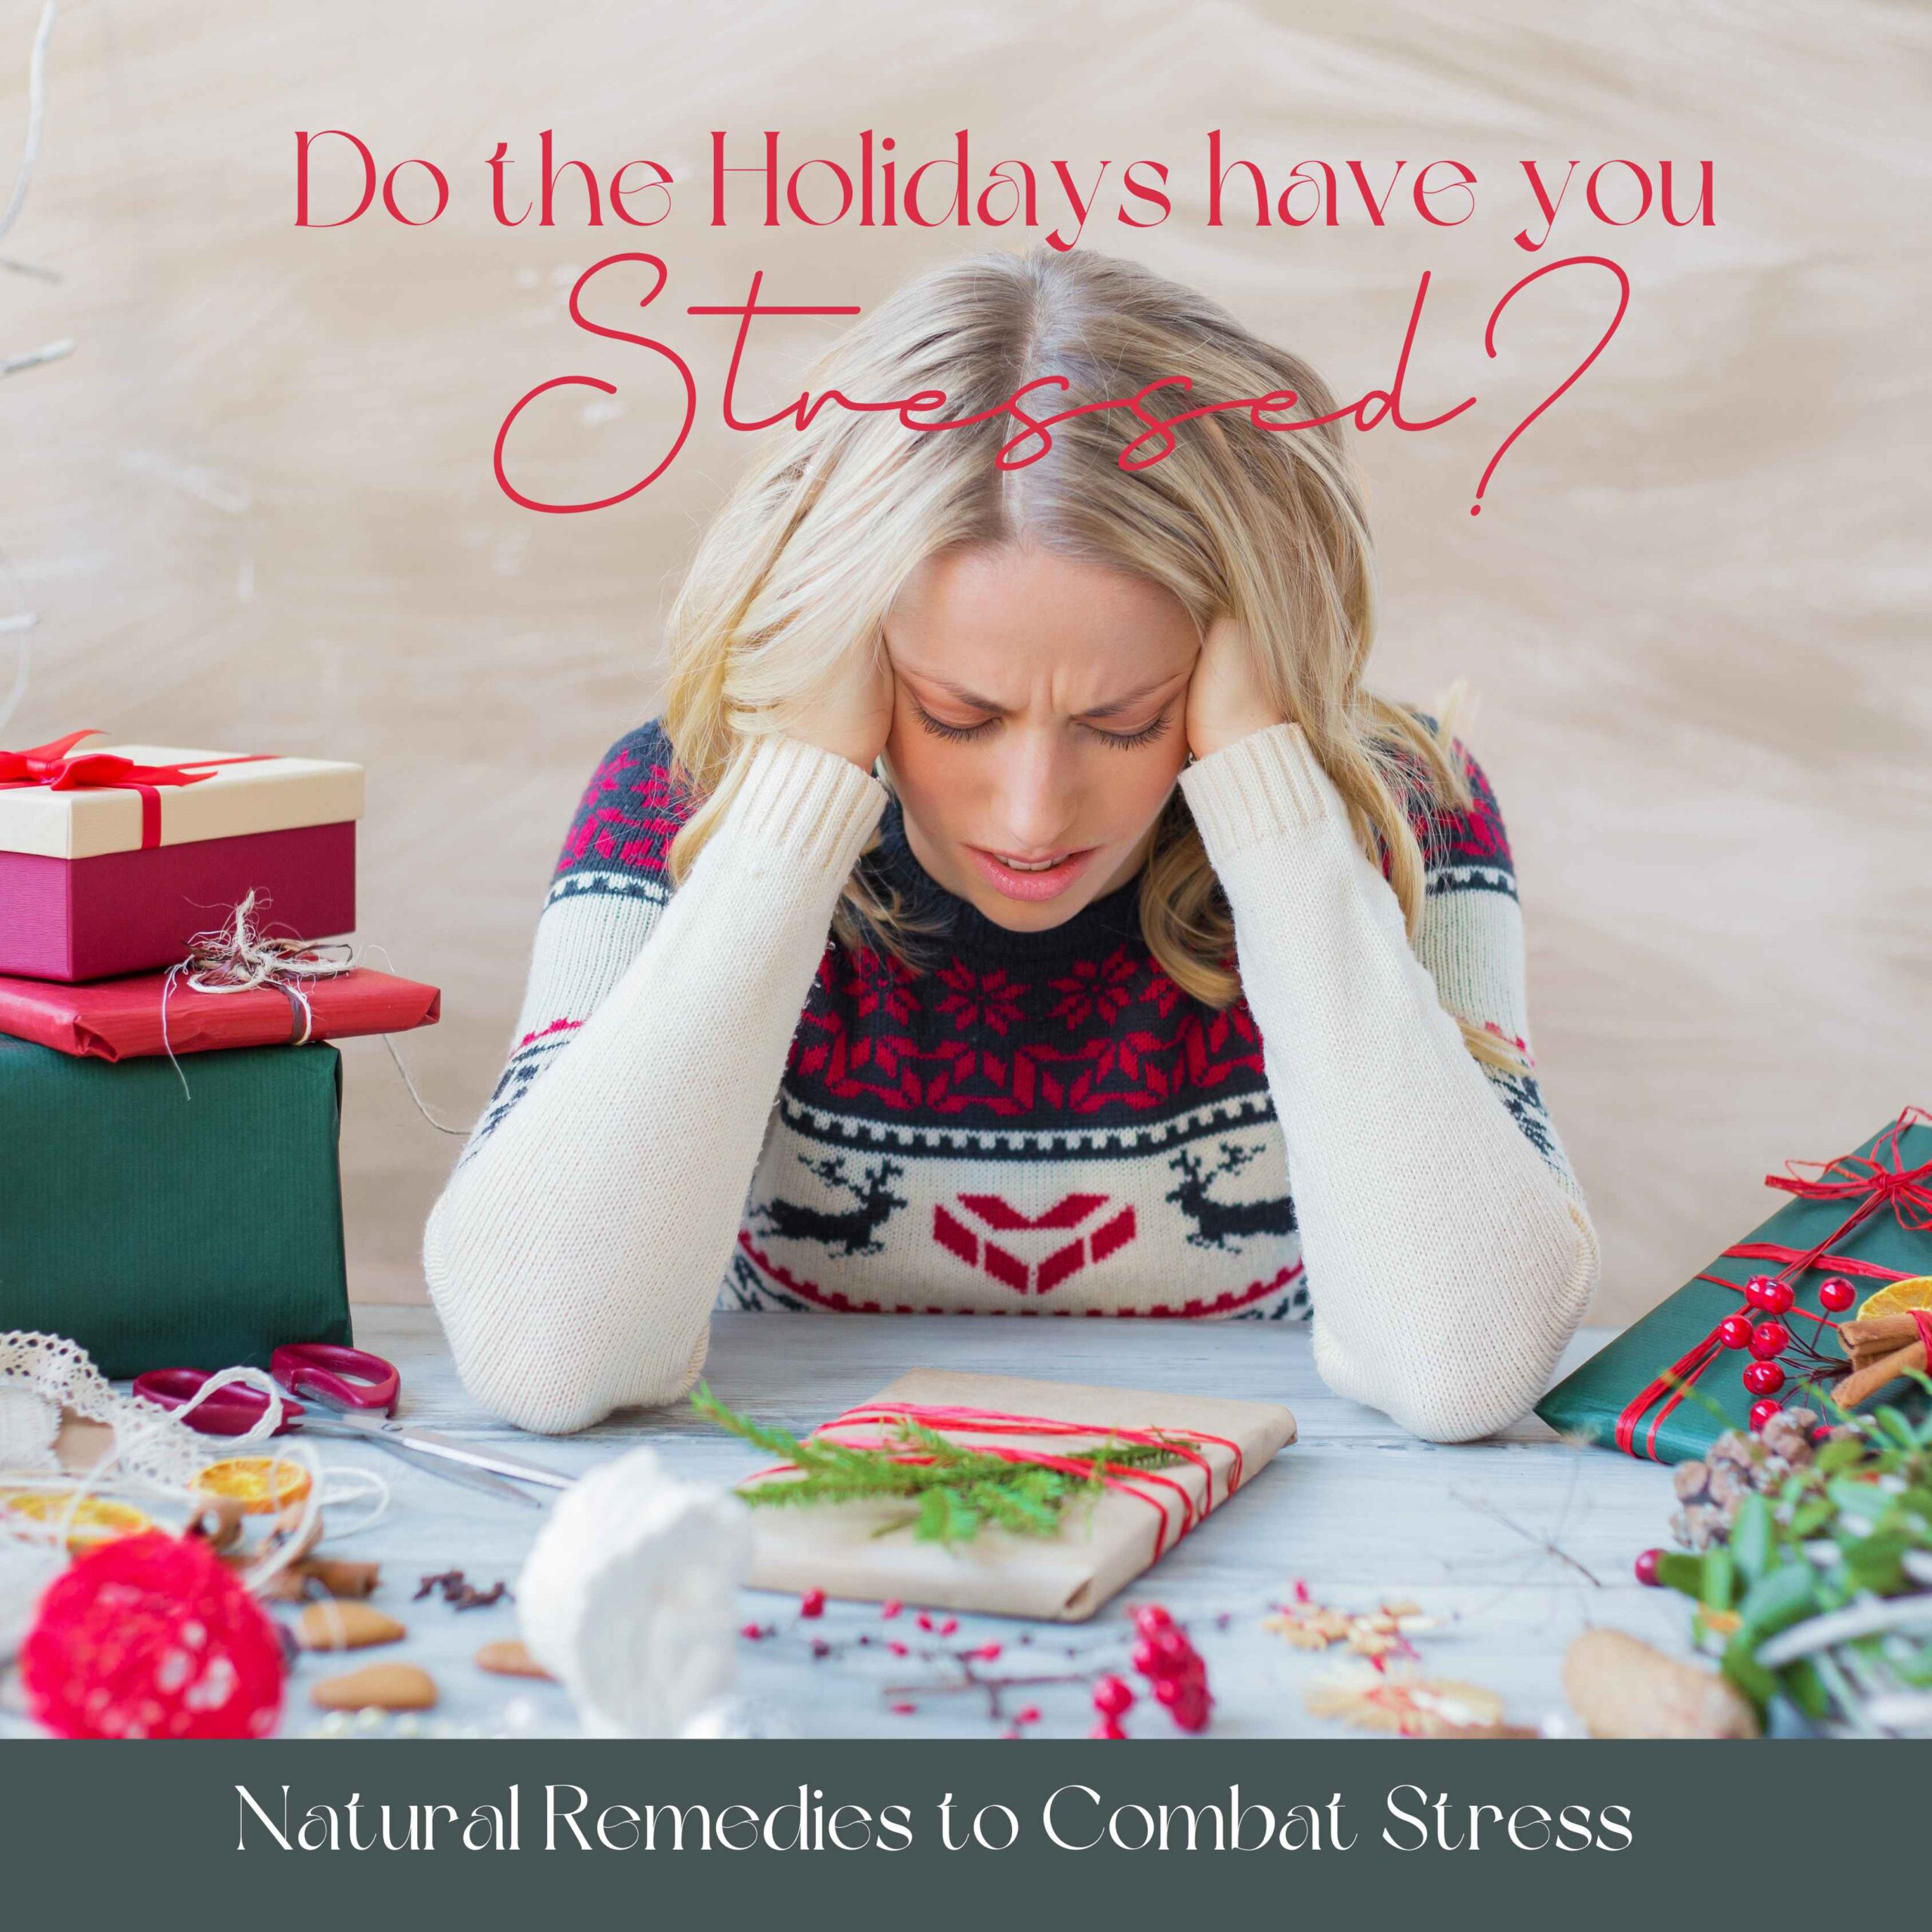 Natural Remedies to combat the Holiday Stress